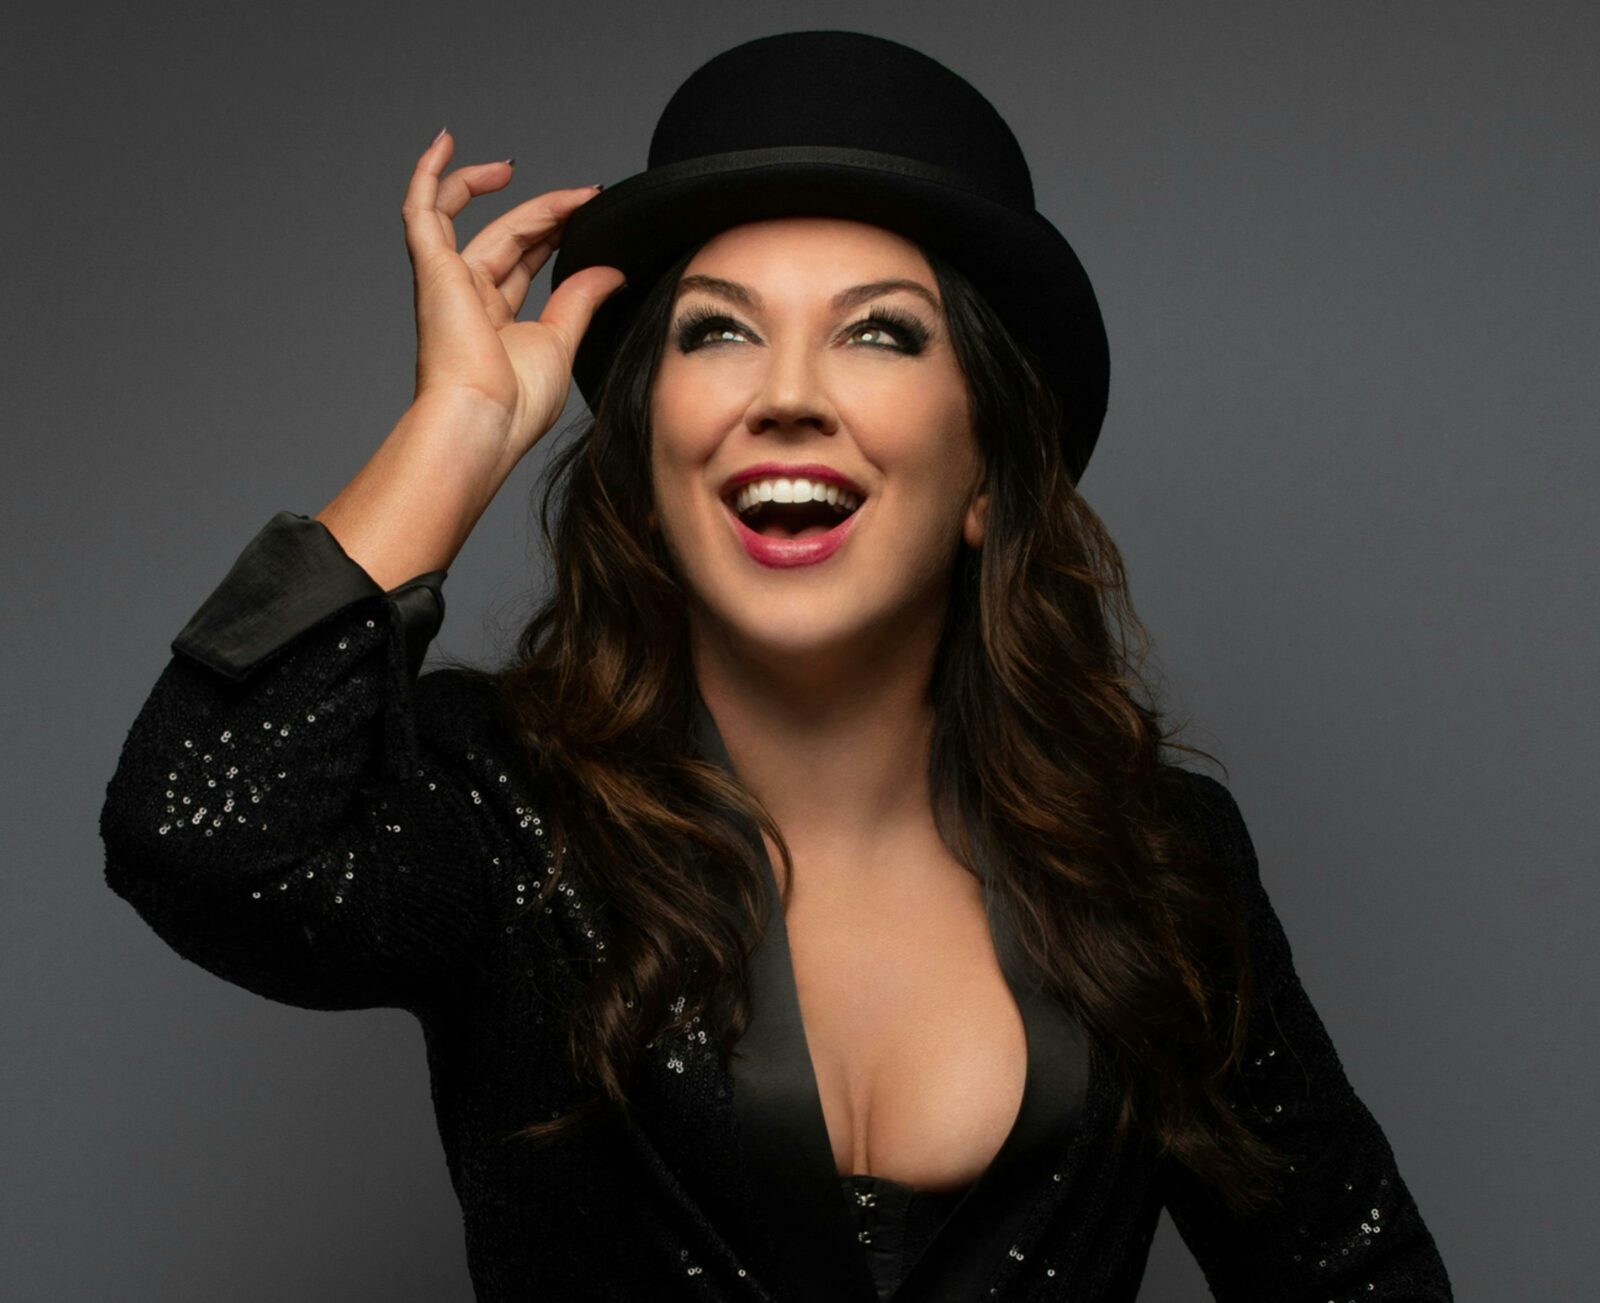 A performer in top hat and jacket is smiling and holding on to her hat